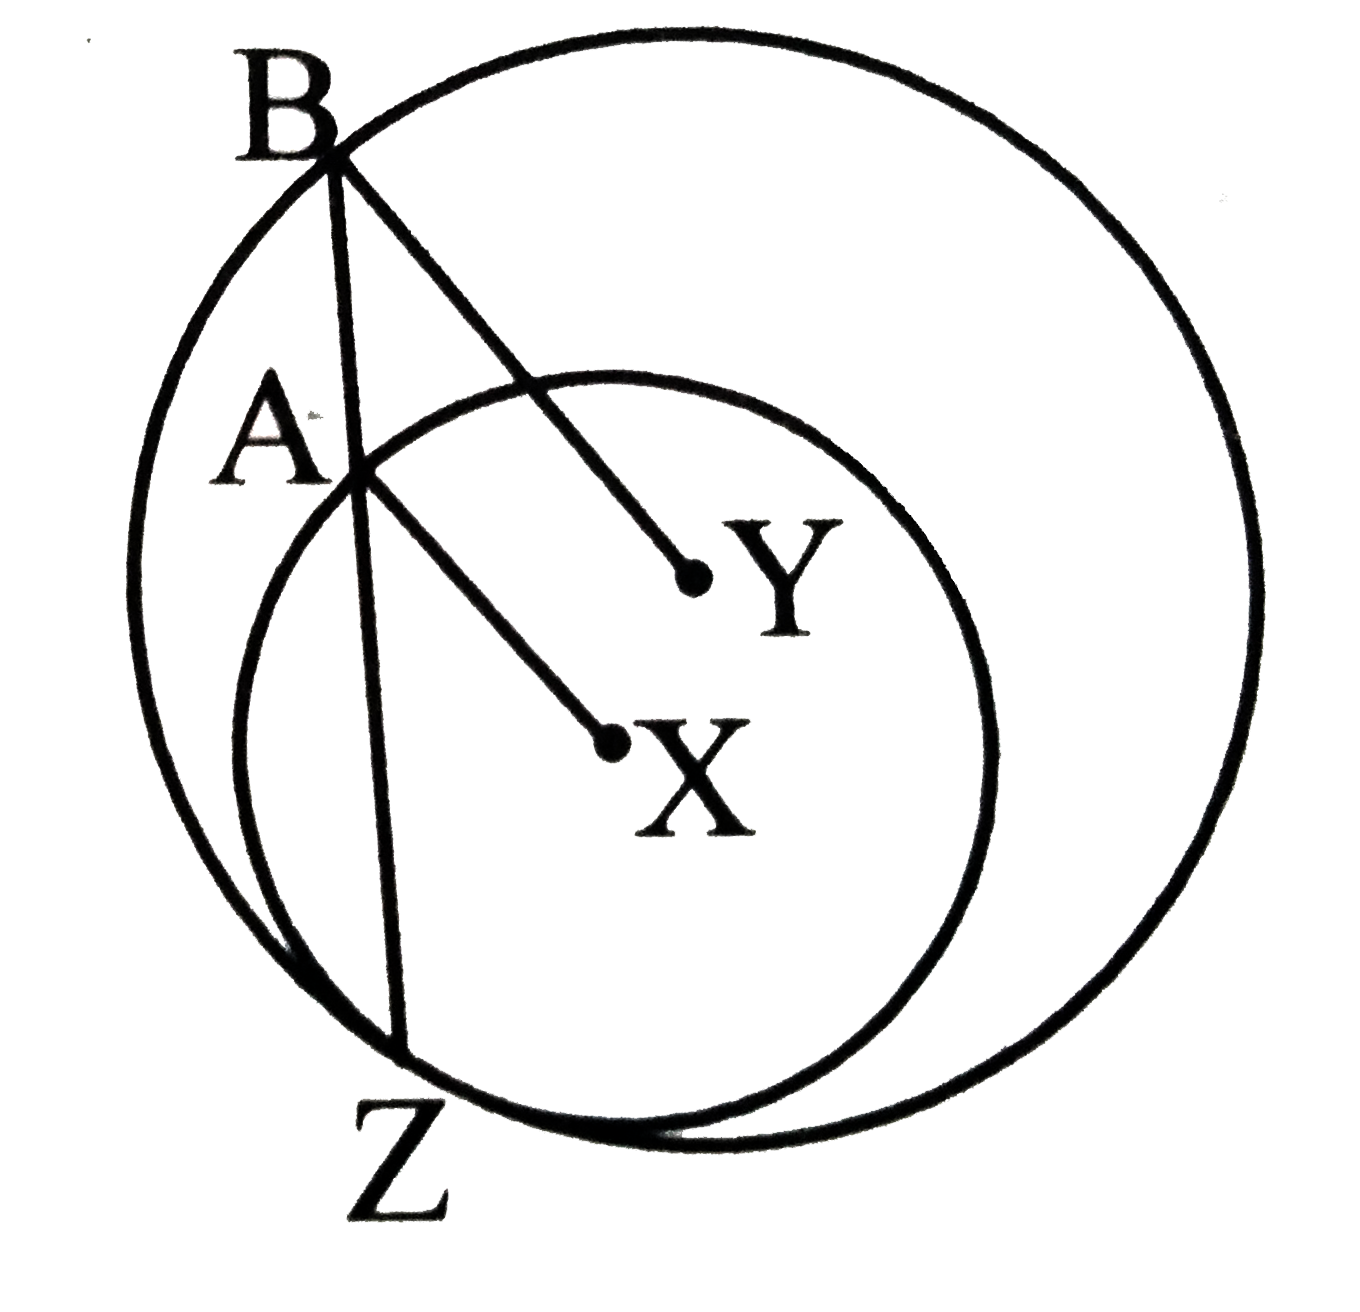 In the adjoining figure, circles with centres X and Y touch internally   at point Z. Seg BZ is a chord of bigger circle and it intersects smallest   circle at point A. prove that, seg AX ||seg BY.